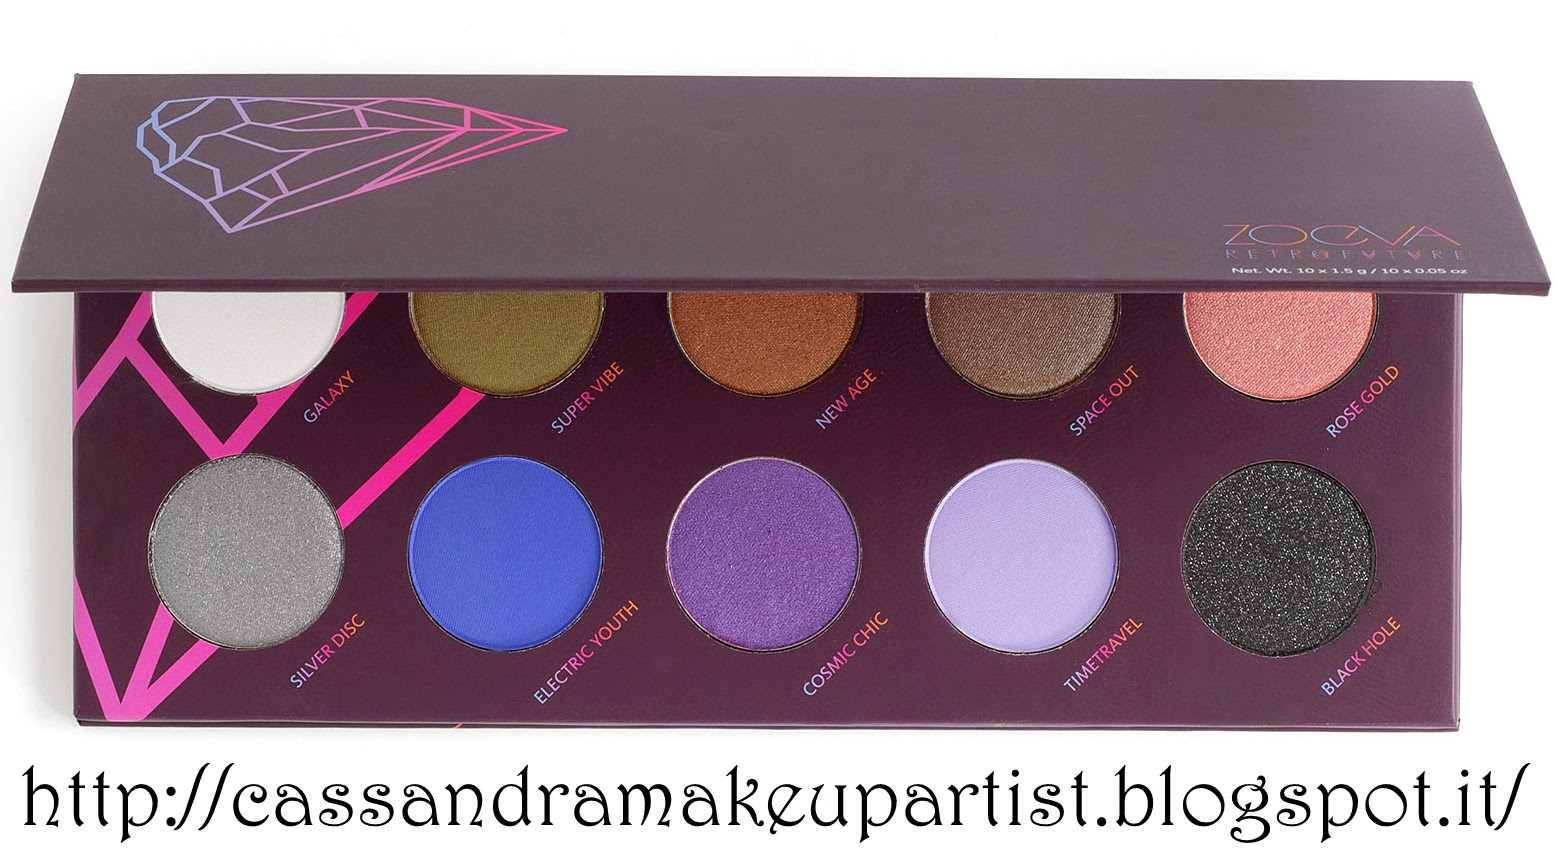 ZOEVA - Nuove Palette -  new palettes - INCI - Pot - 2014 - price -  Naturally Yours  - Rodeo Belle  - Love is a Story  - Retro Future